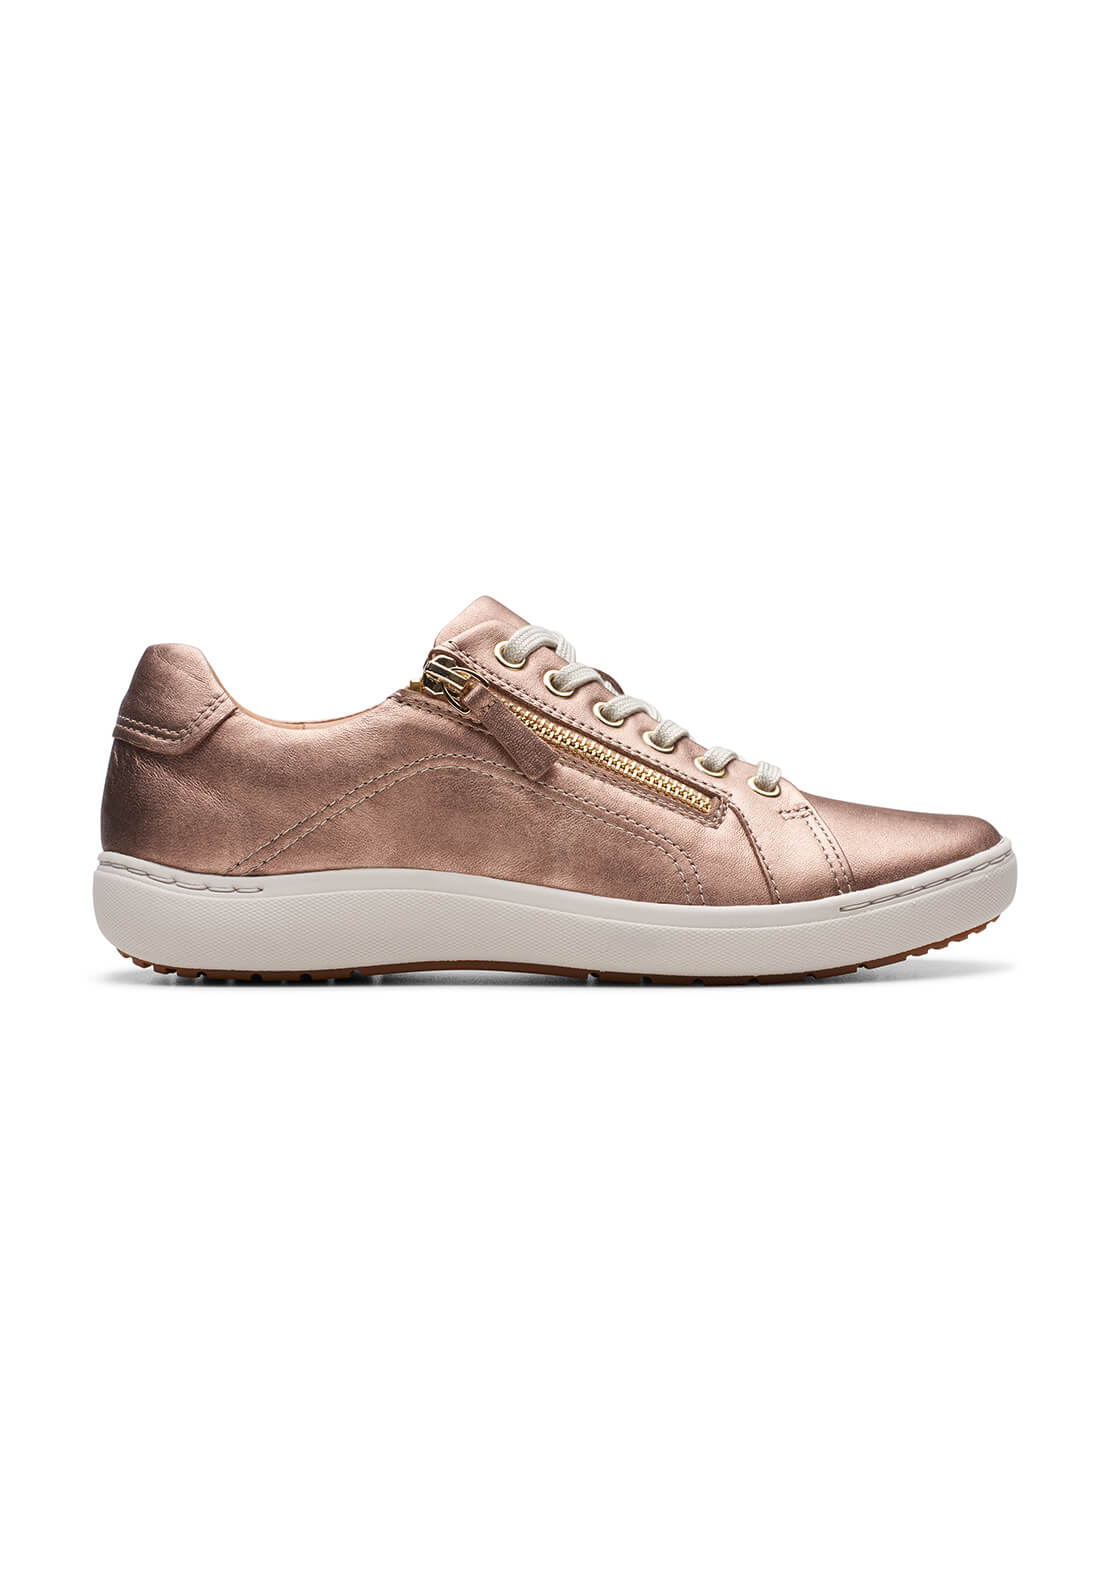 Clarks Nalle Lace Zip Trainer - Rose Gold 3 Shaws Department Stores